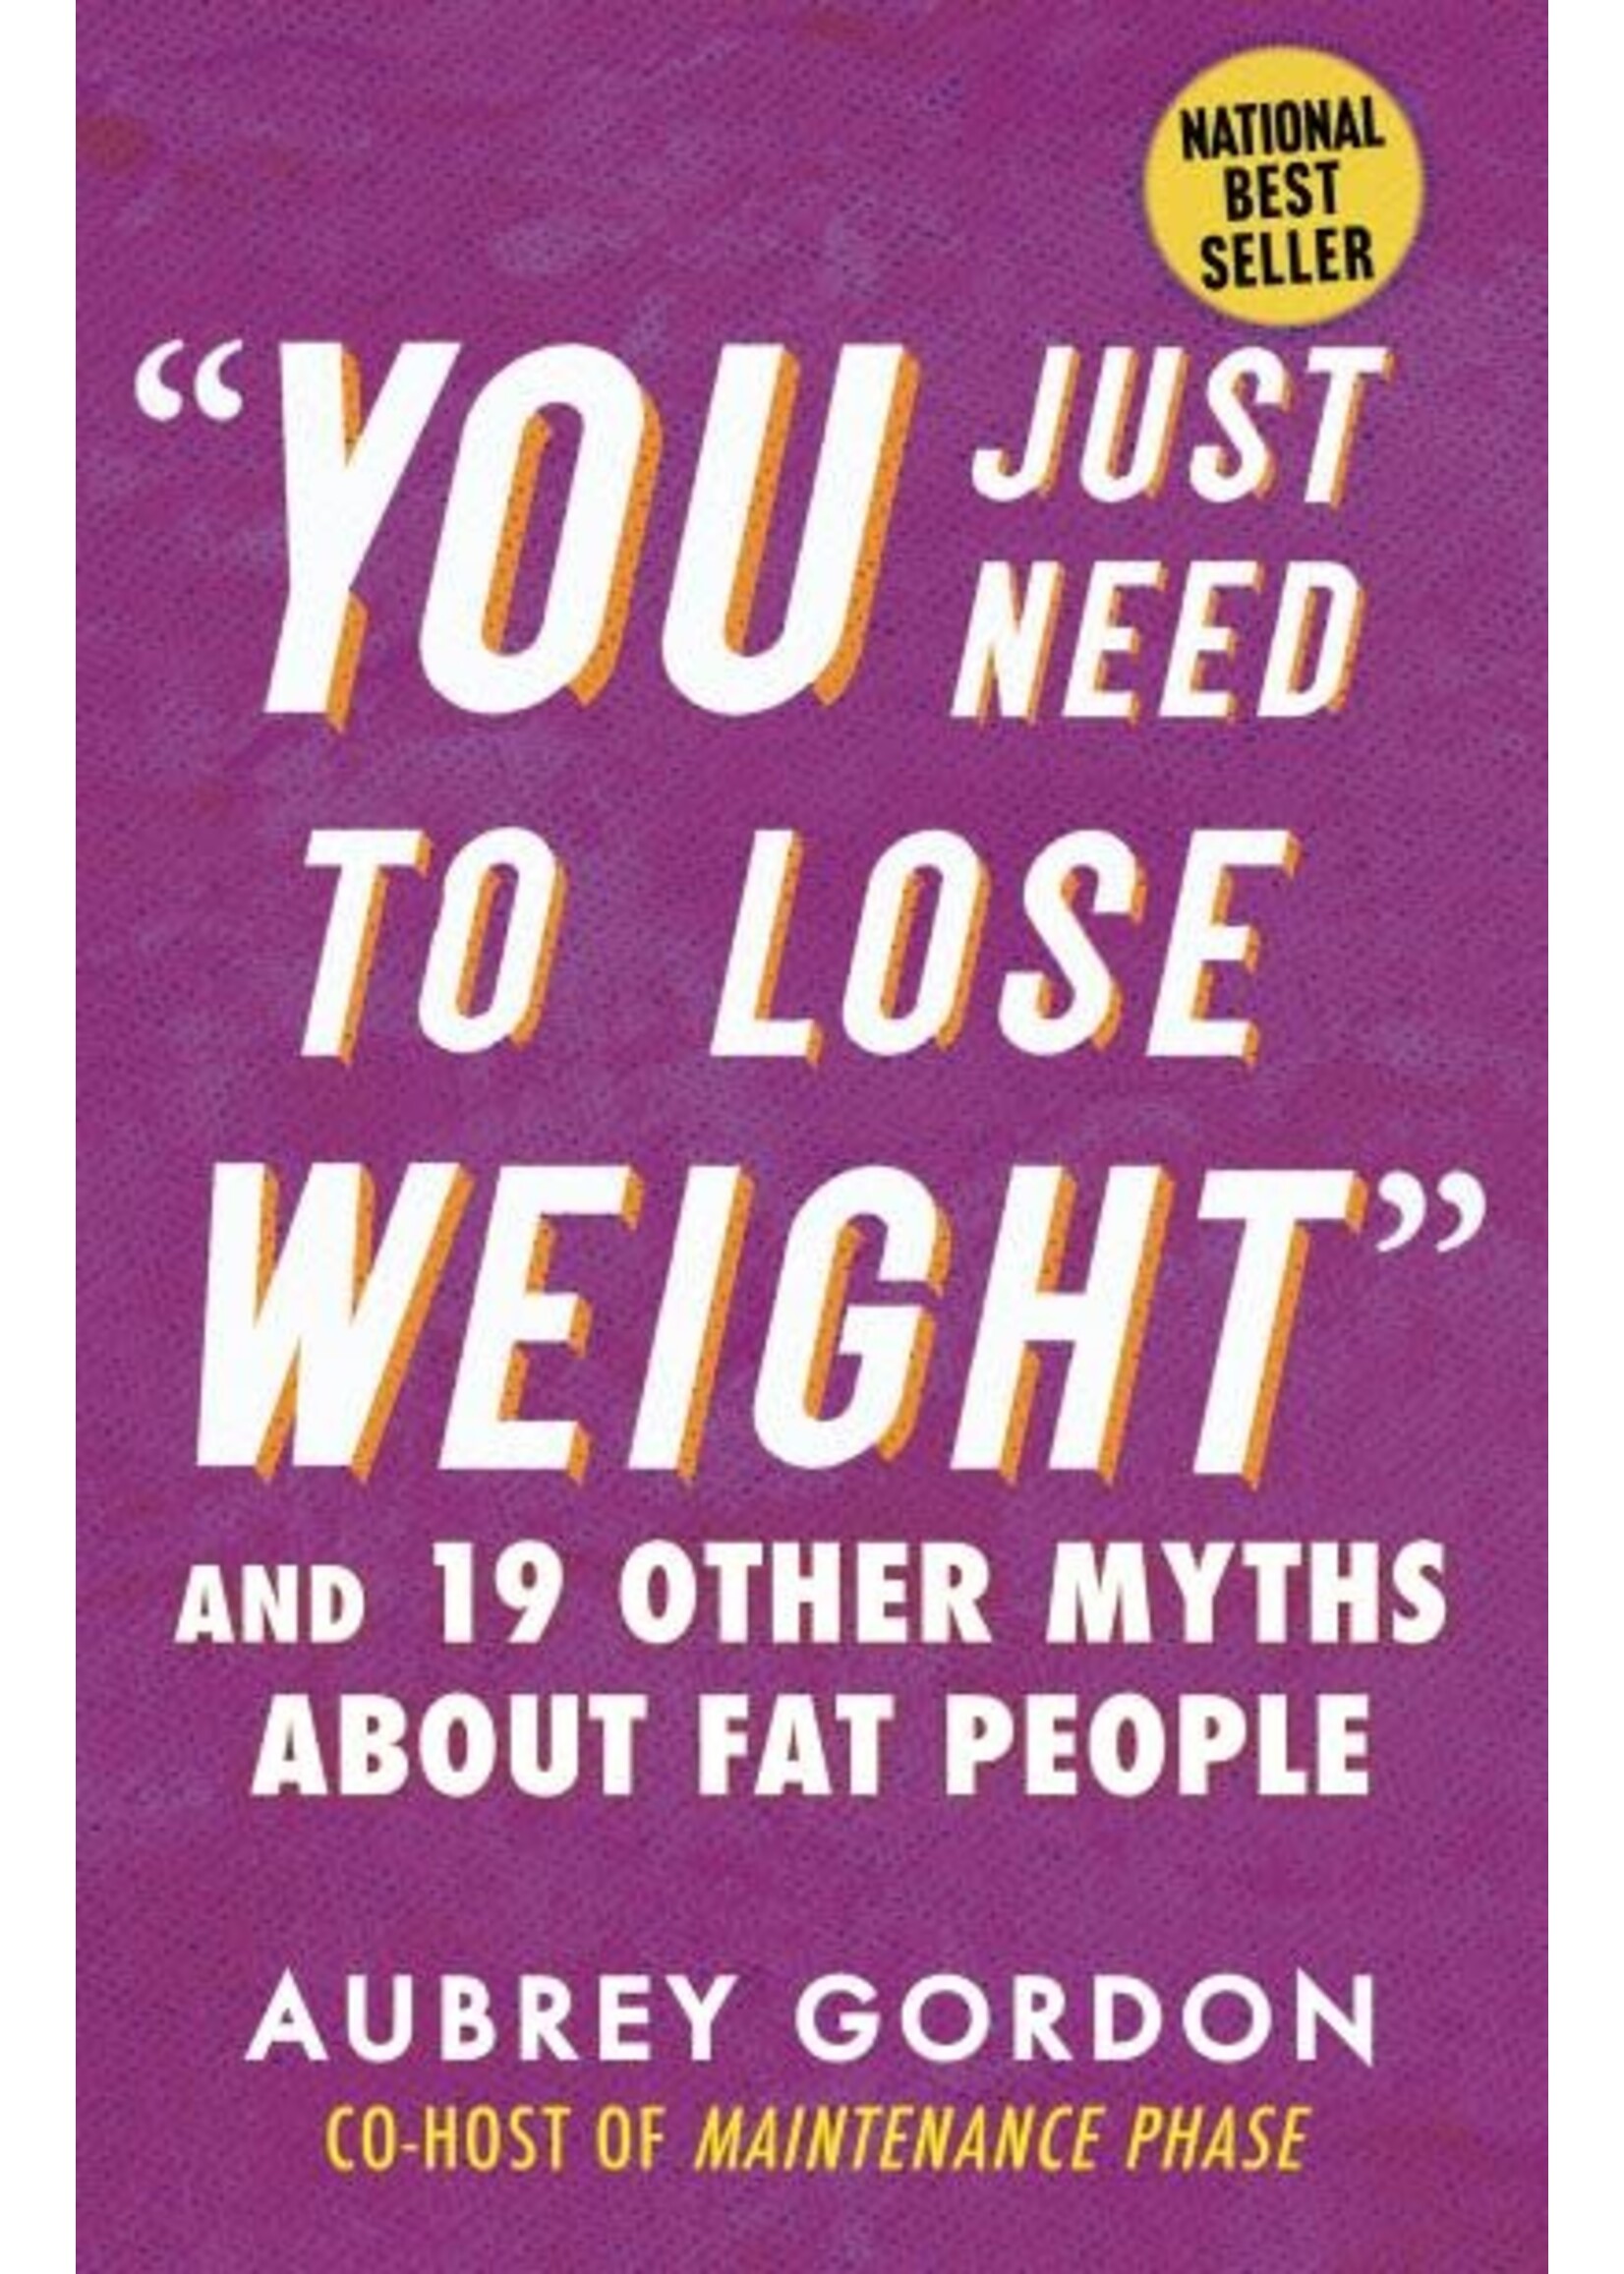 "You Just Need to Lose Weight" And 19 Other Myths About Fat People by Aubrey Gordon